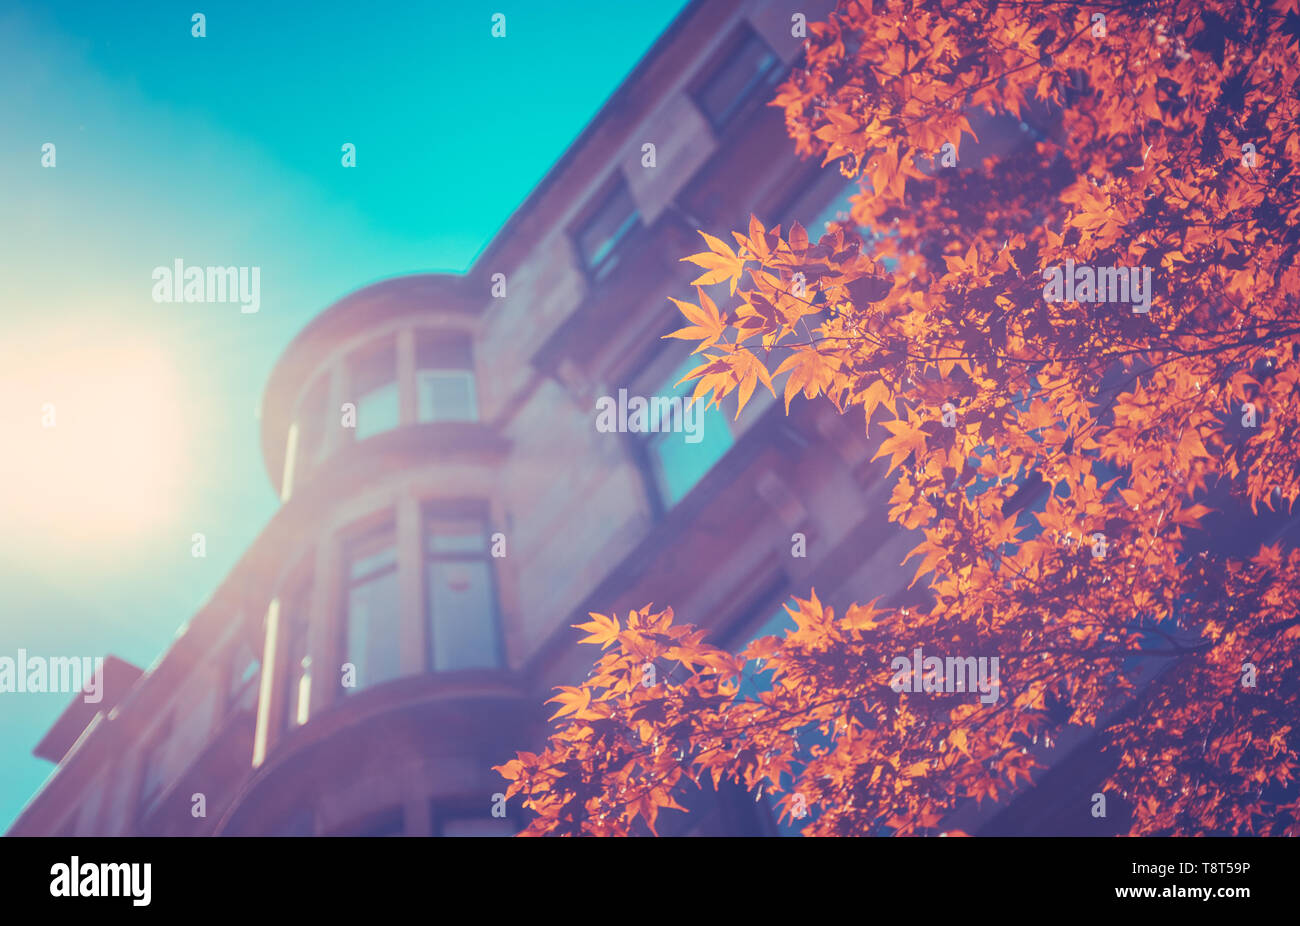 Retro Style Image Of Red Sandstone Tenement Flats In Glasgow's West End With Beautiful Spring Leaves In The Foreground Stock Photo